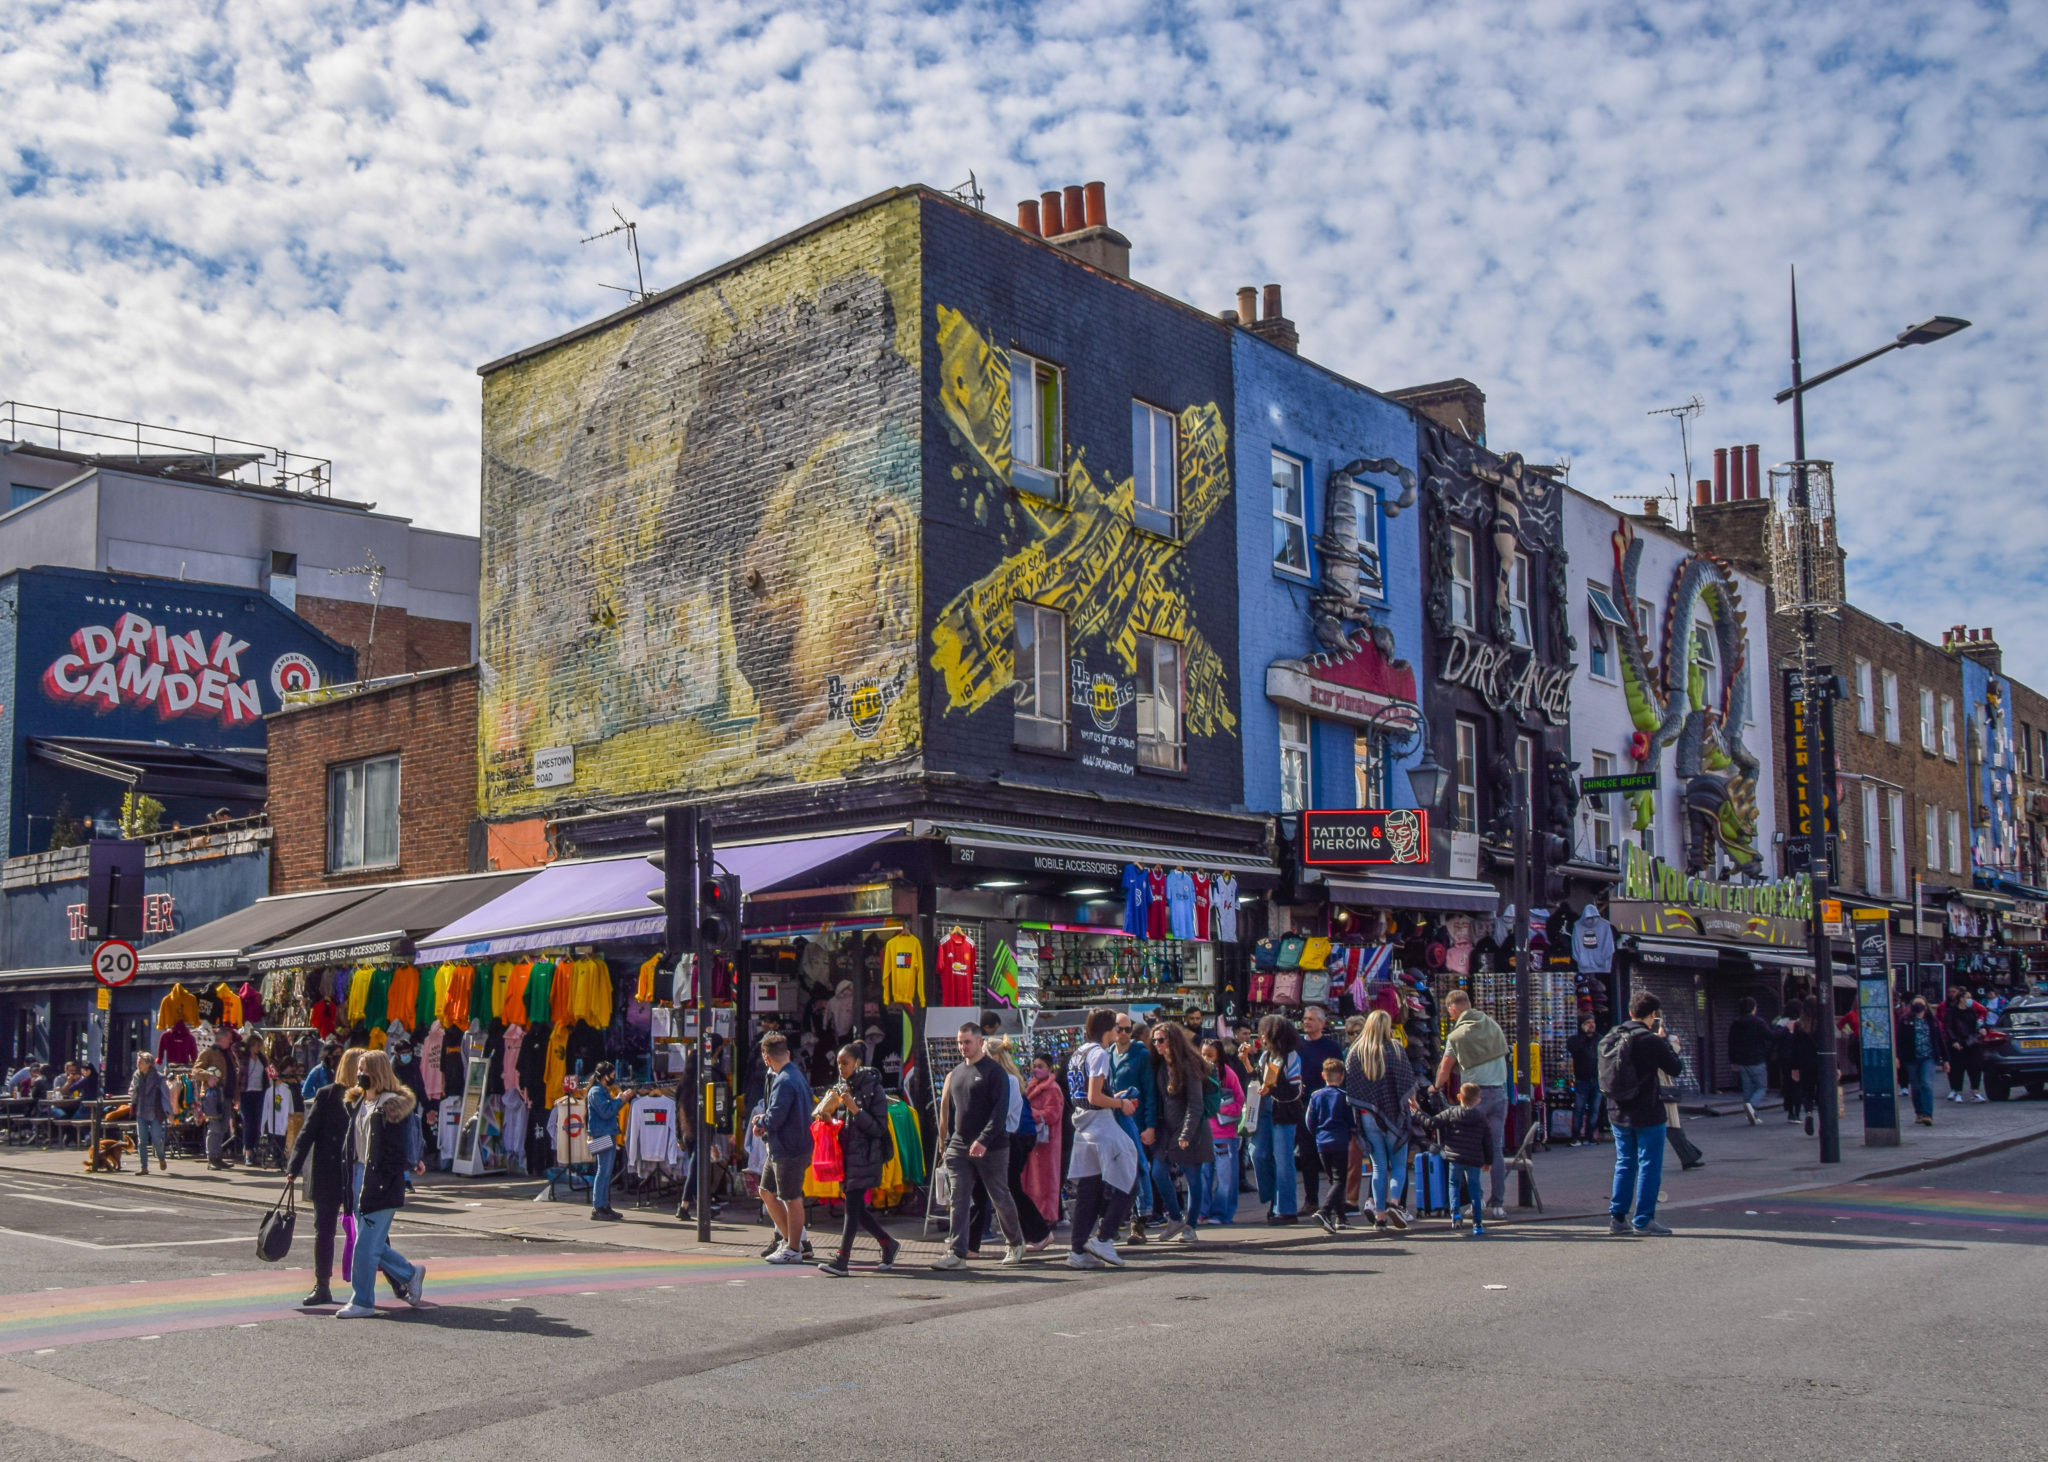 Shops reopen in Camden High Street in London as lockdown rules are relaxed